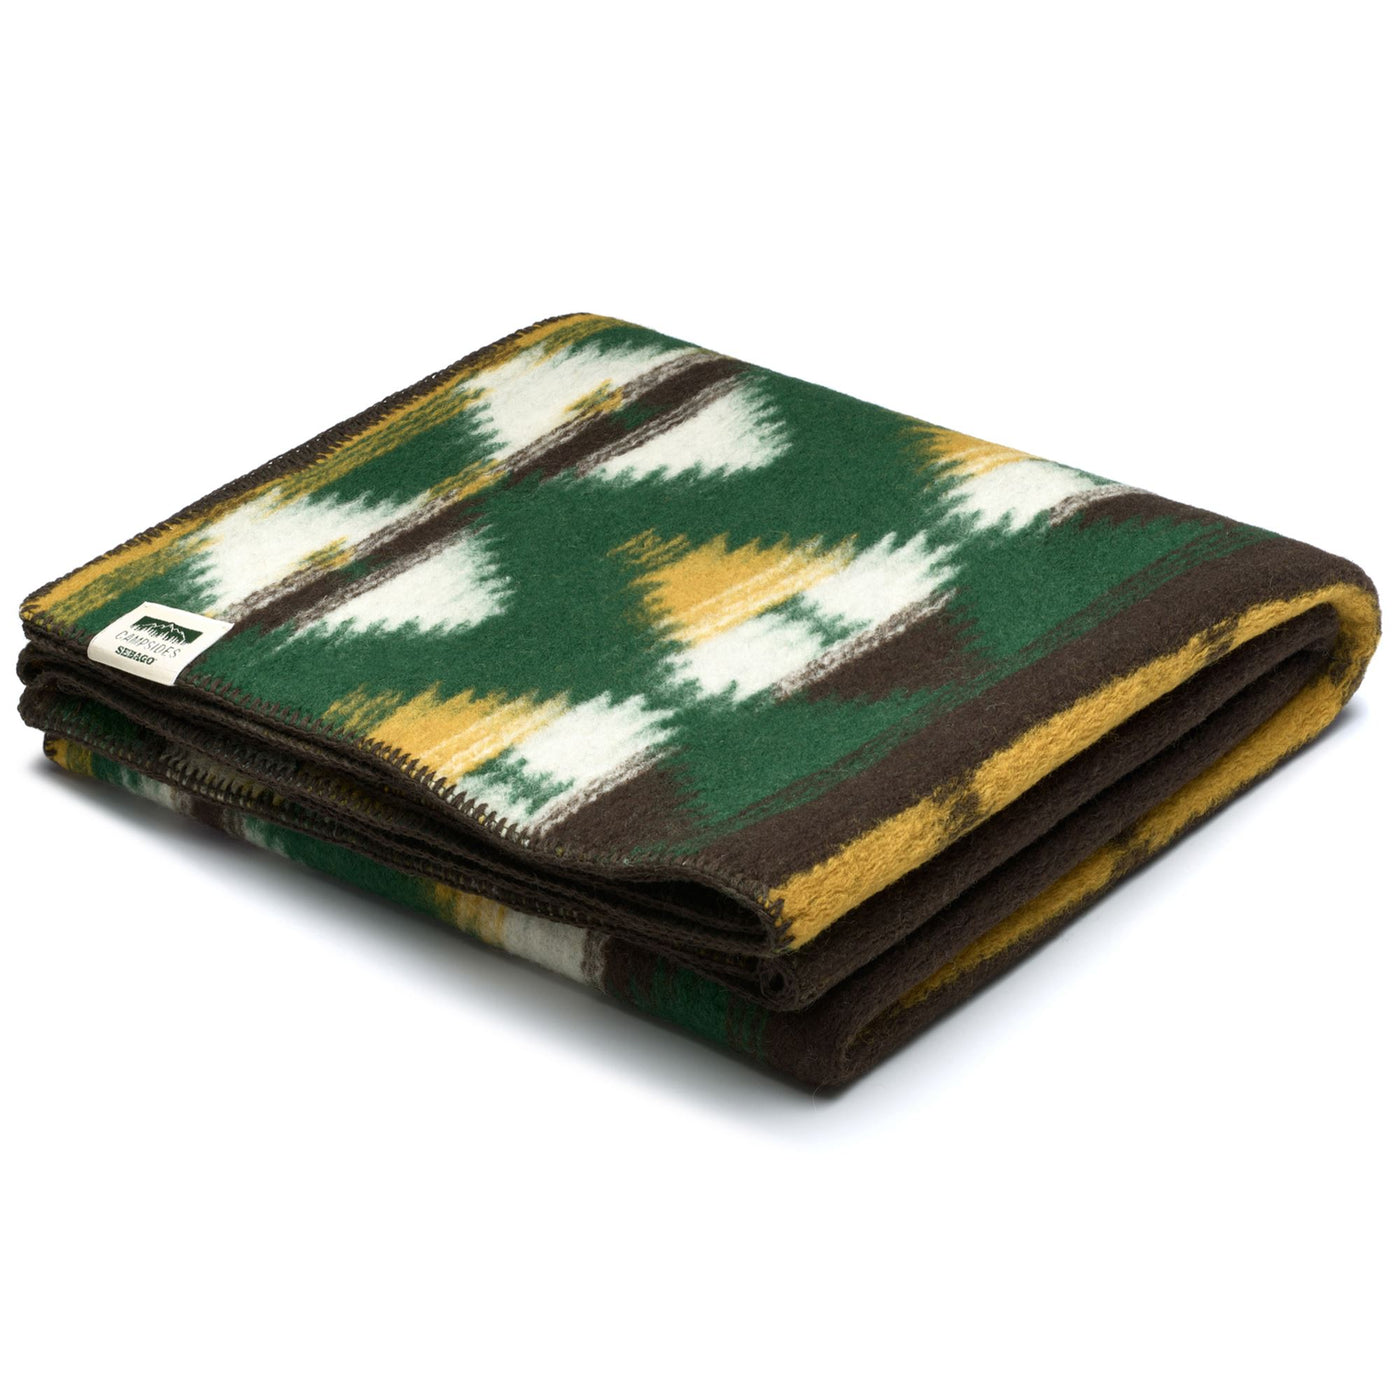 Quilts and blankets Unisex ASH Blanket GREEN-OFF WHITE- YELLOW-BROWN Photo (jpg Rgb)			